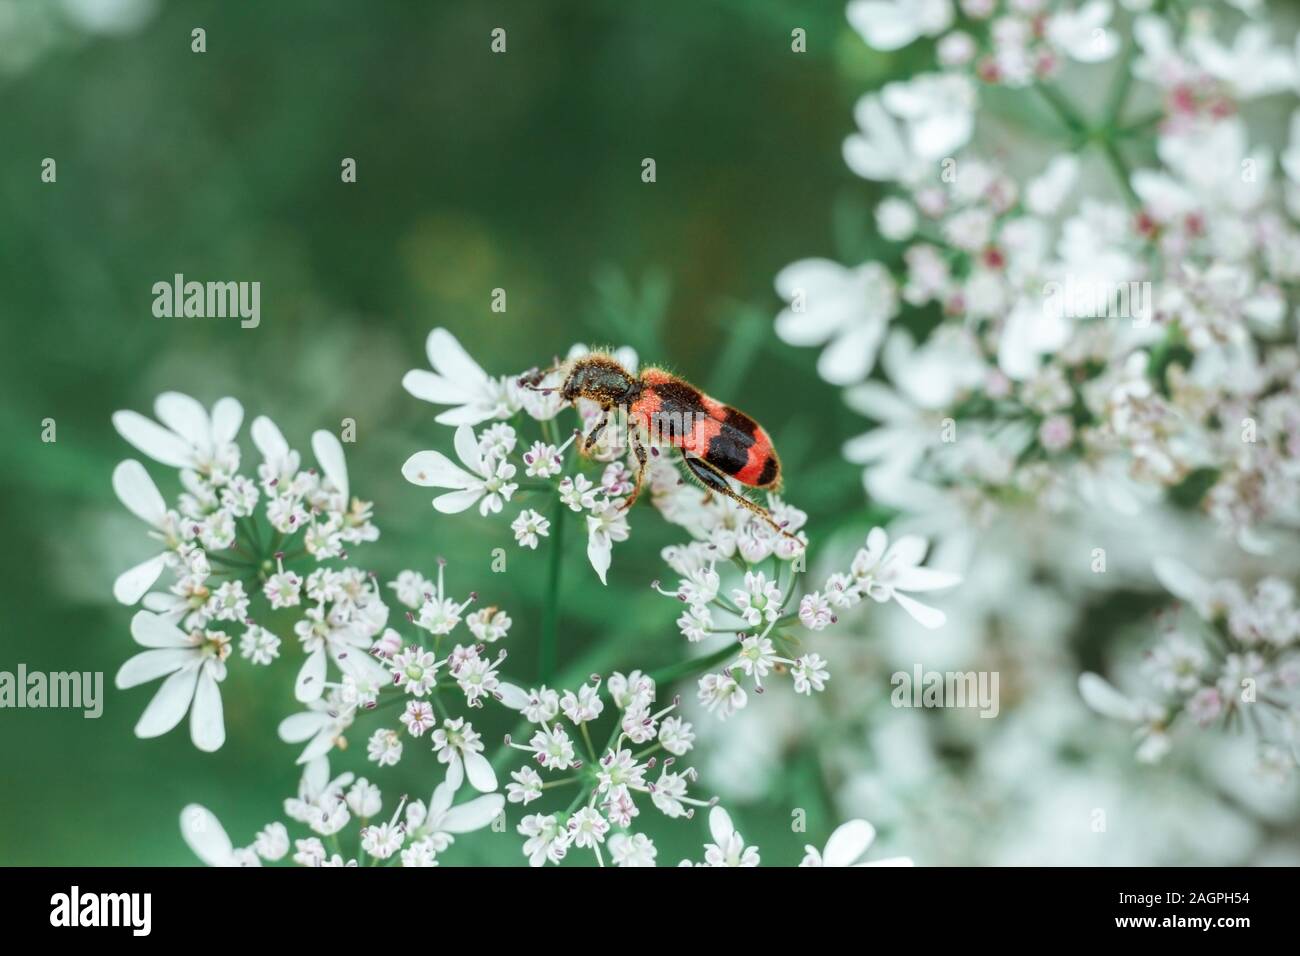 A red black striped fluffy beetle sits on a white flower on a green blurred background. Trichodes or bee beetle. Poisonous plant dog-parsley. Stock Photo